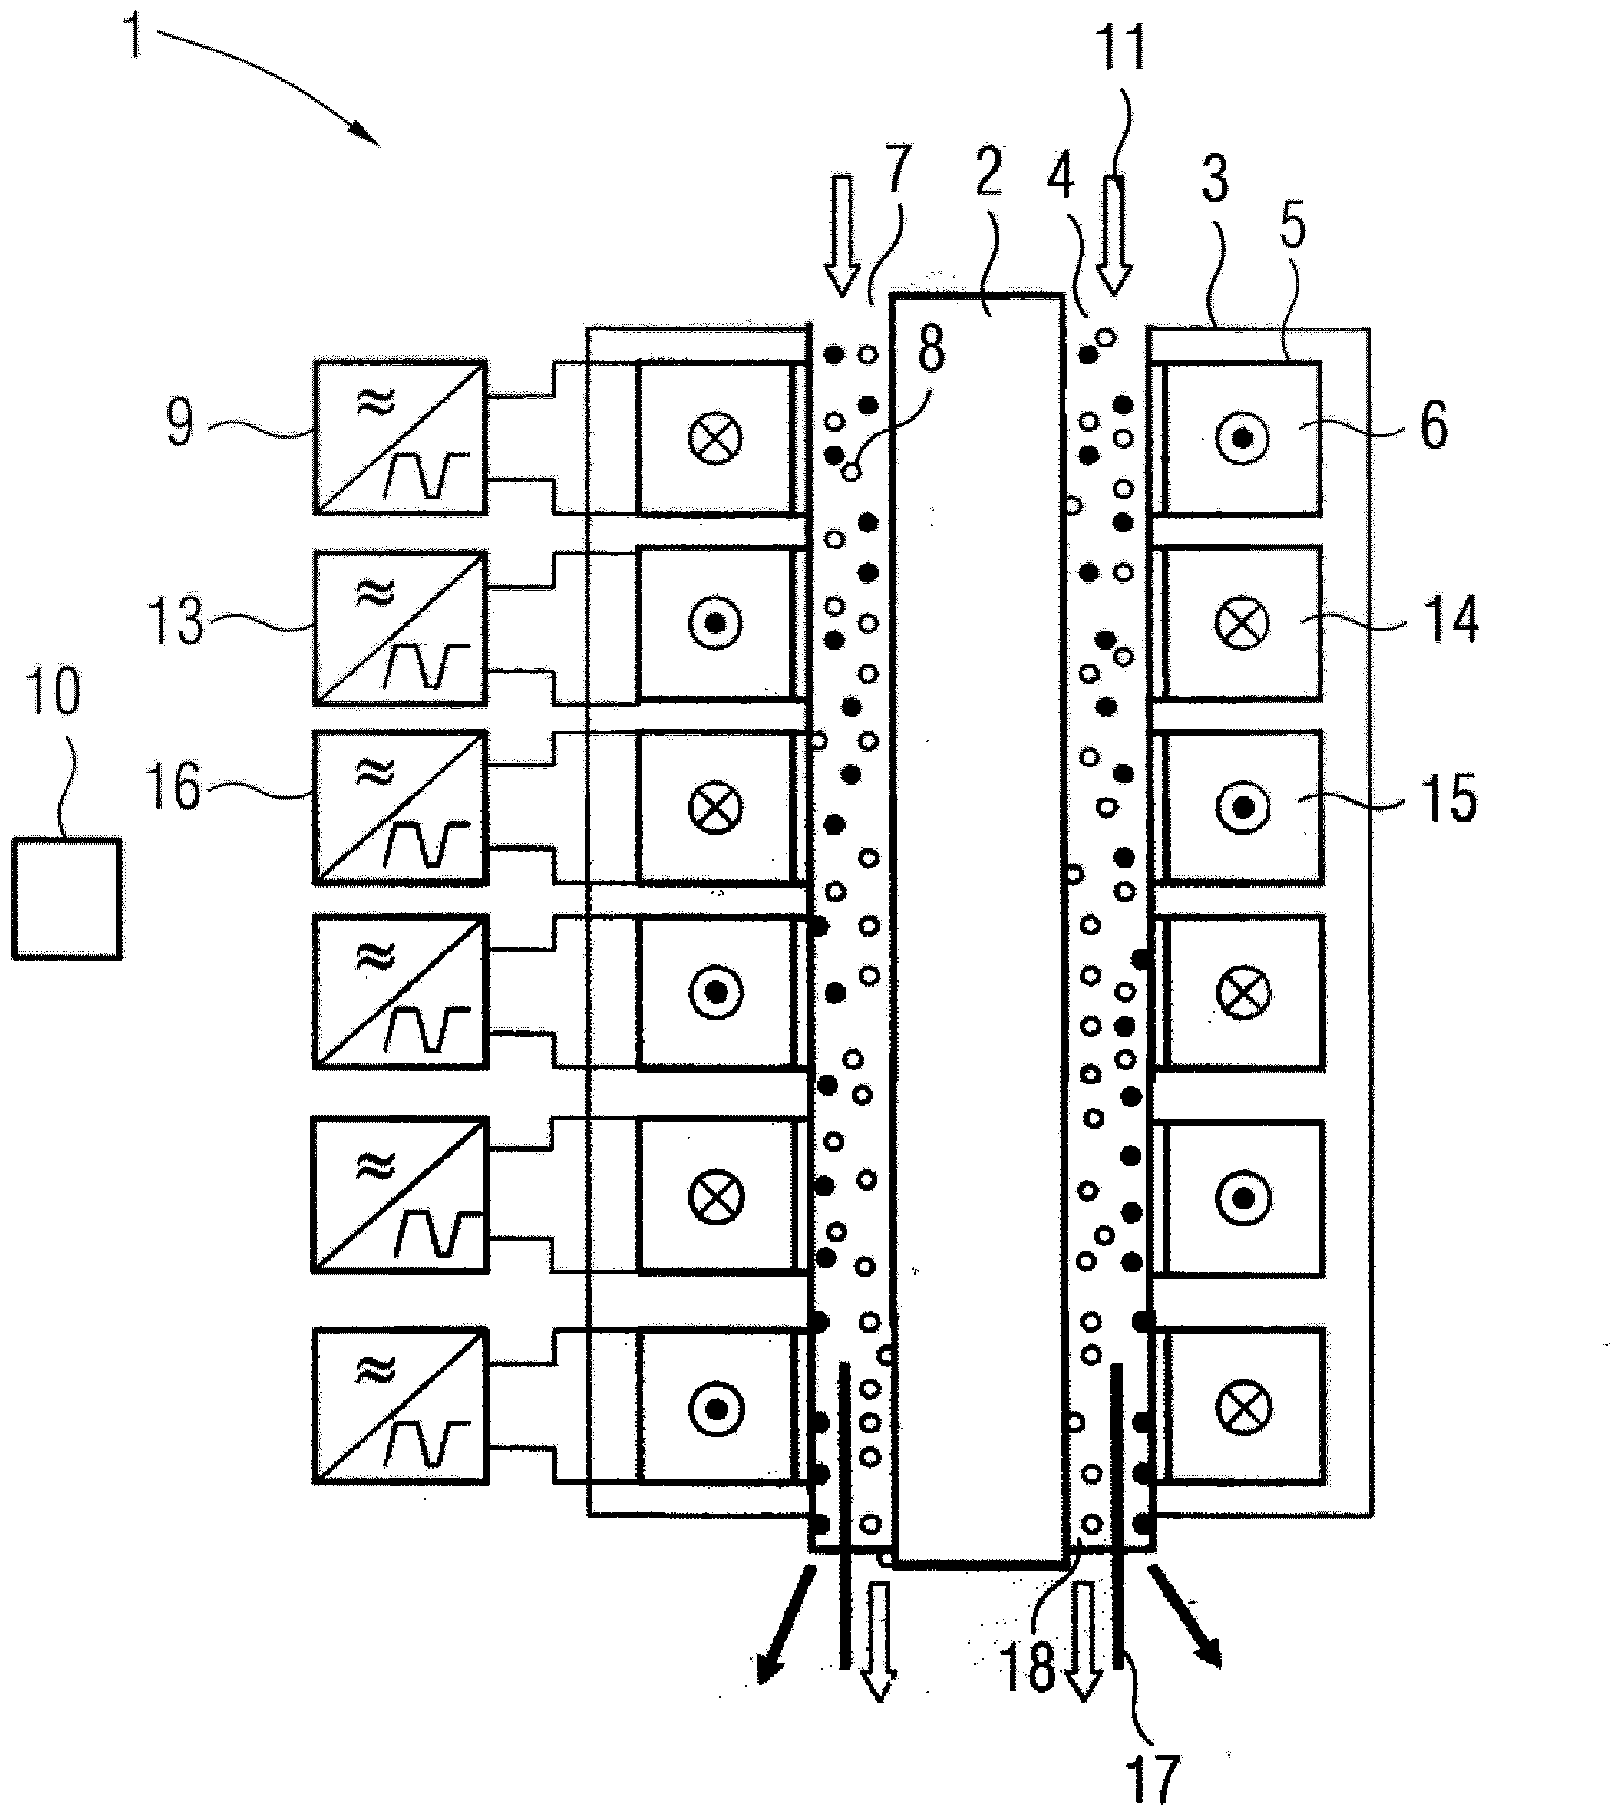 Separating device for separating magnetic or magnetizable particles present in a suspension